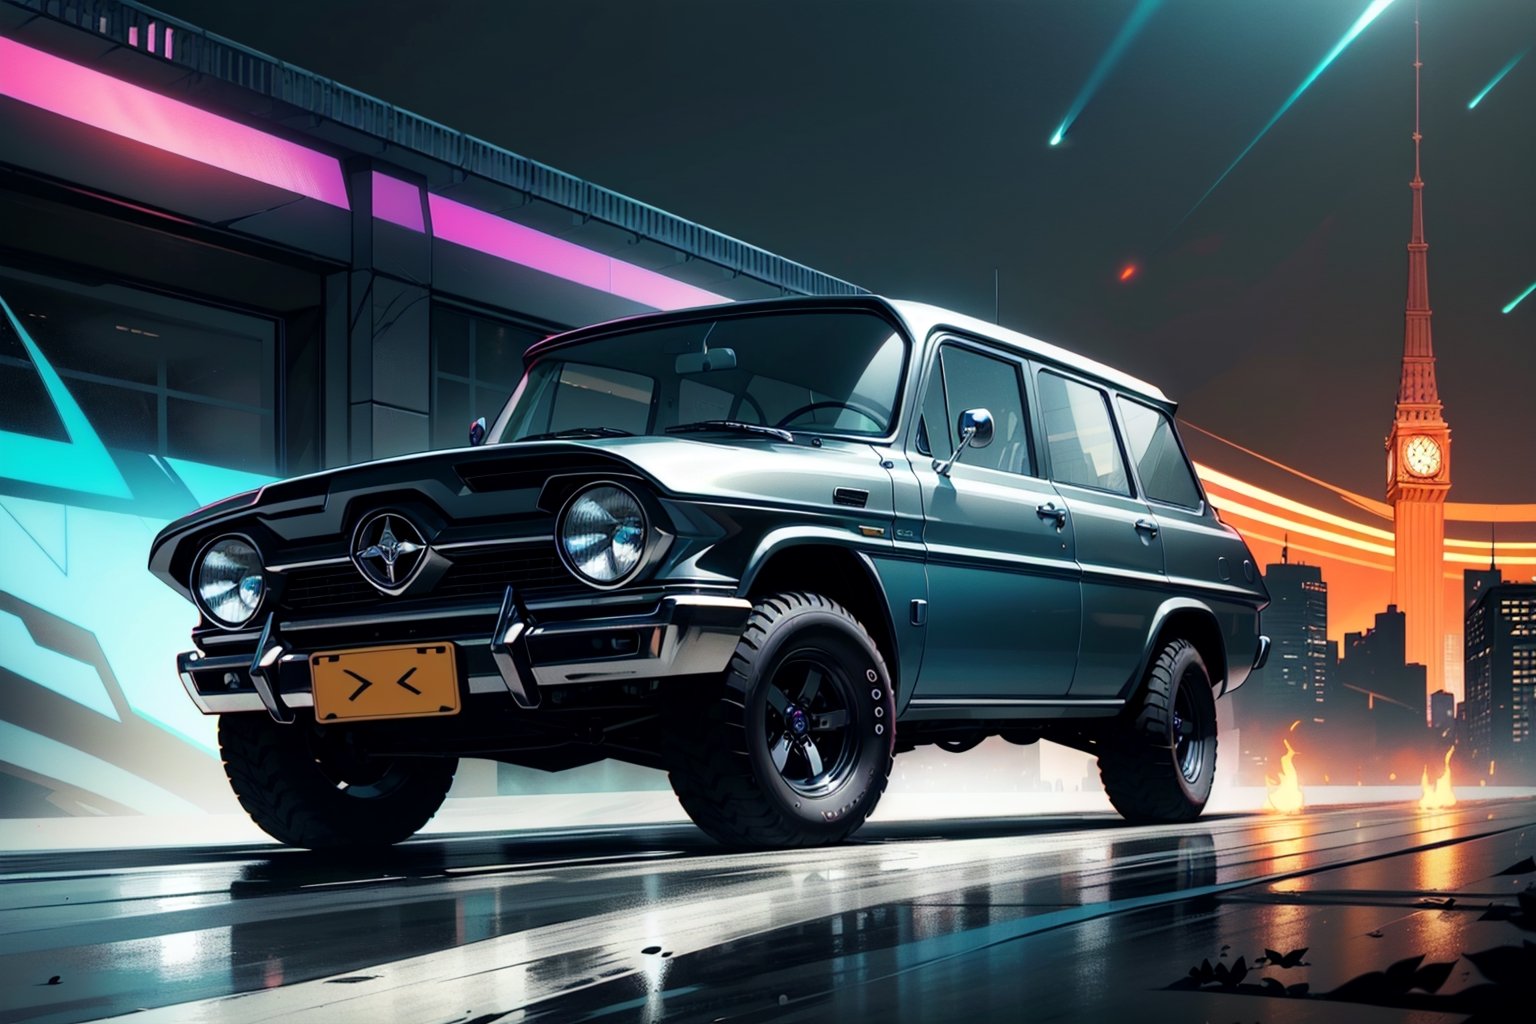 dark bluish-dark-gray metallic 4x4 1960s SUV in motion, fantasy, no logo, urban, 1960s, worm colors, a small building, High detailed, Color magic, Saturated colors, Color saturation, Realism, 8K, HD